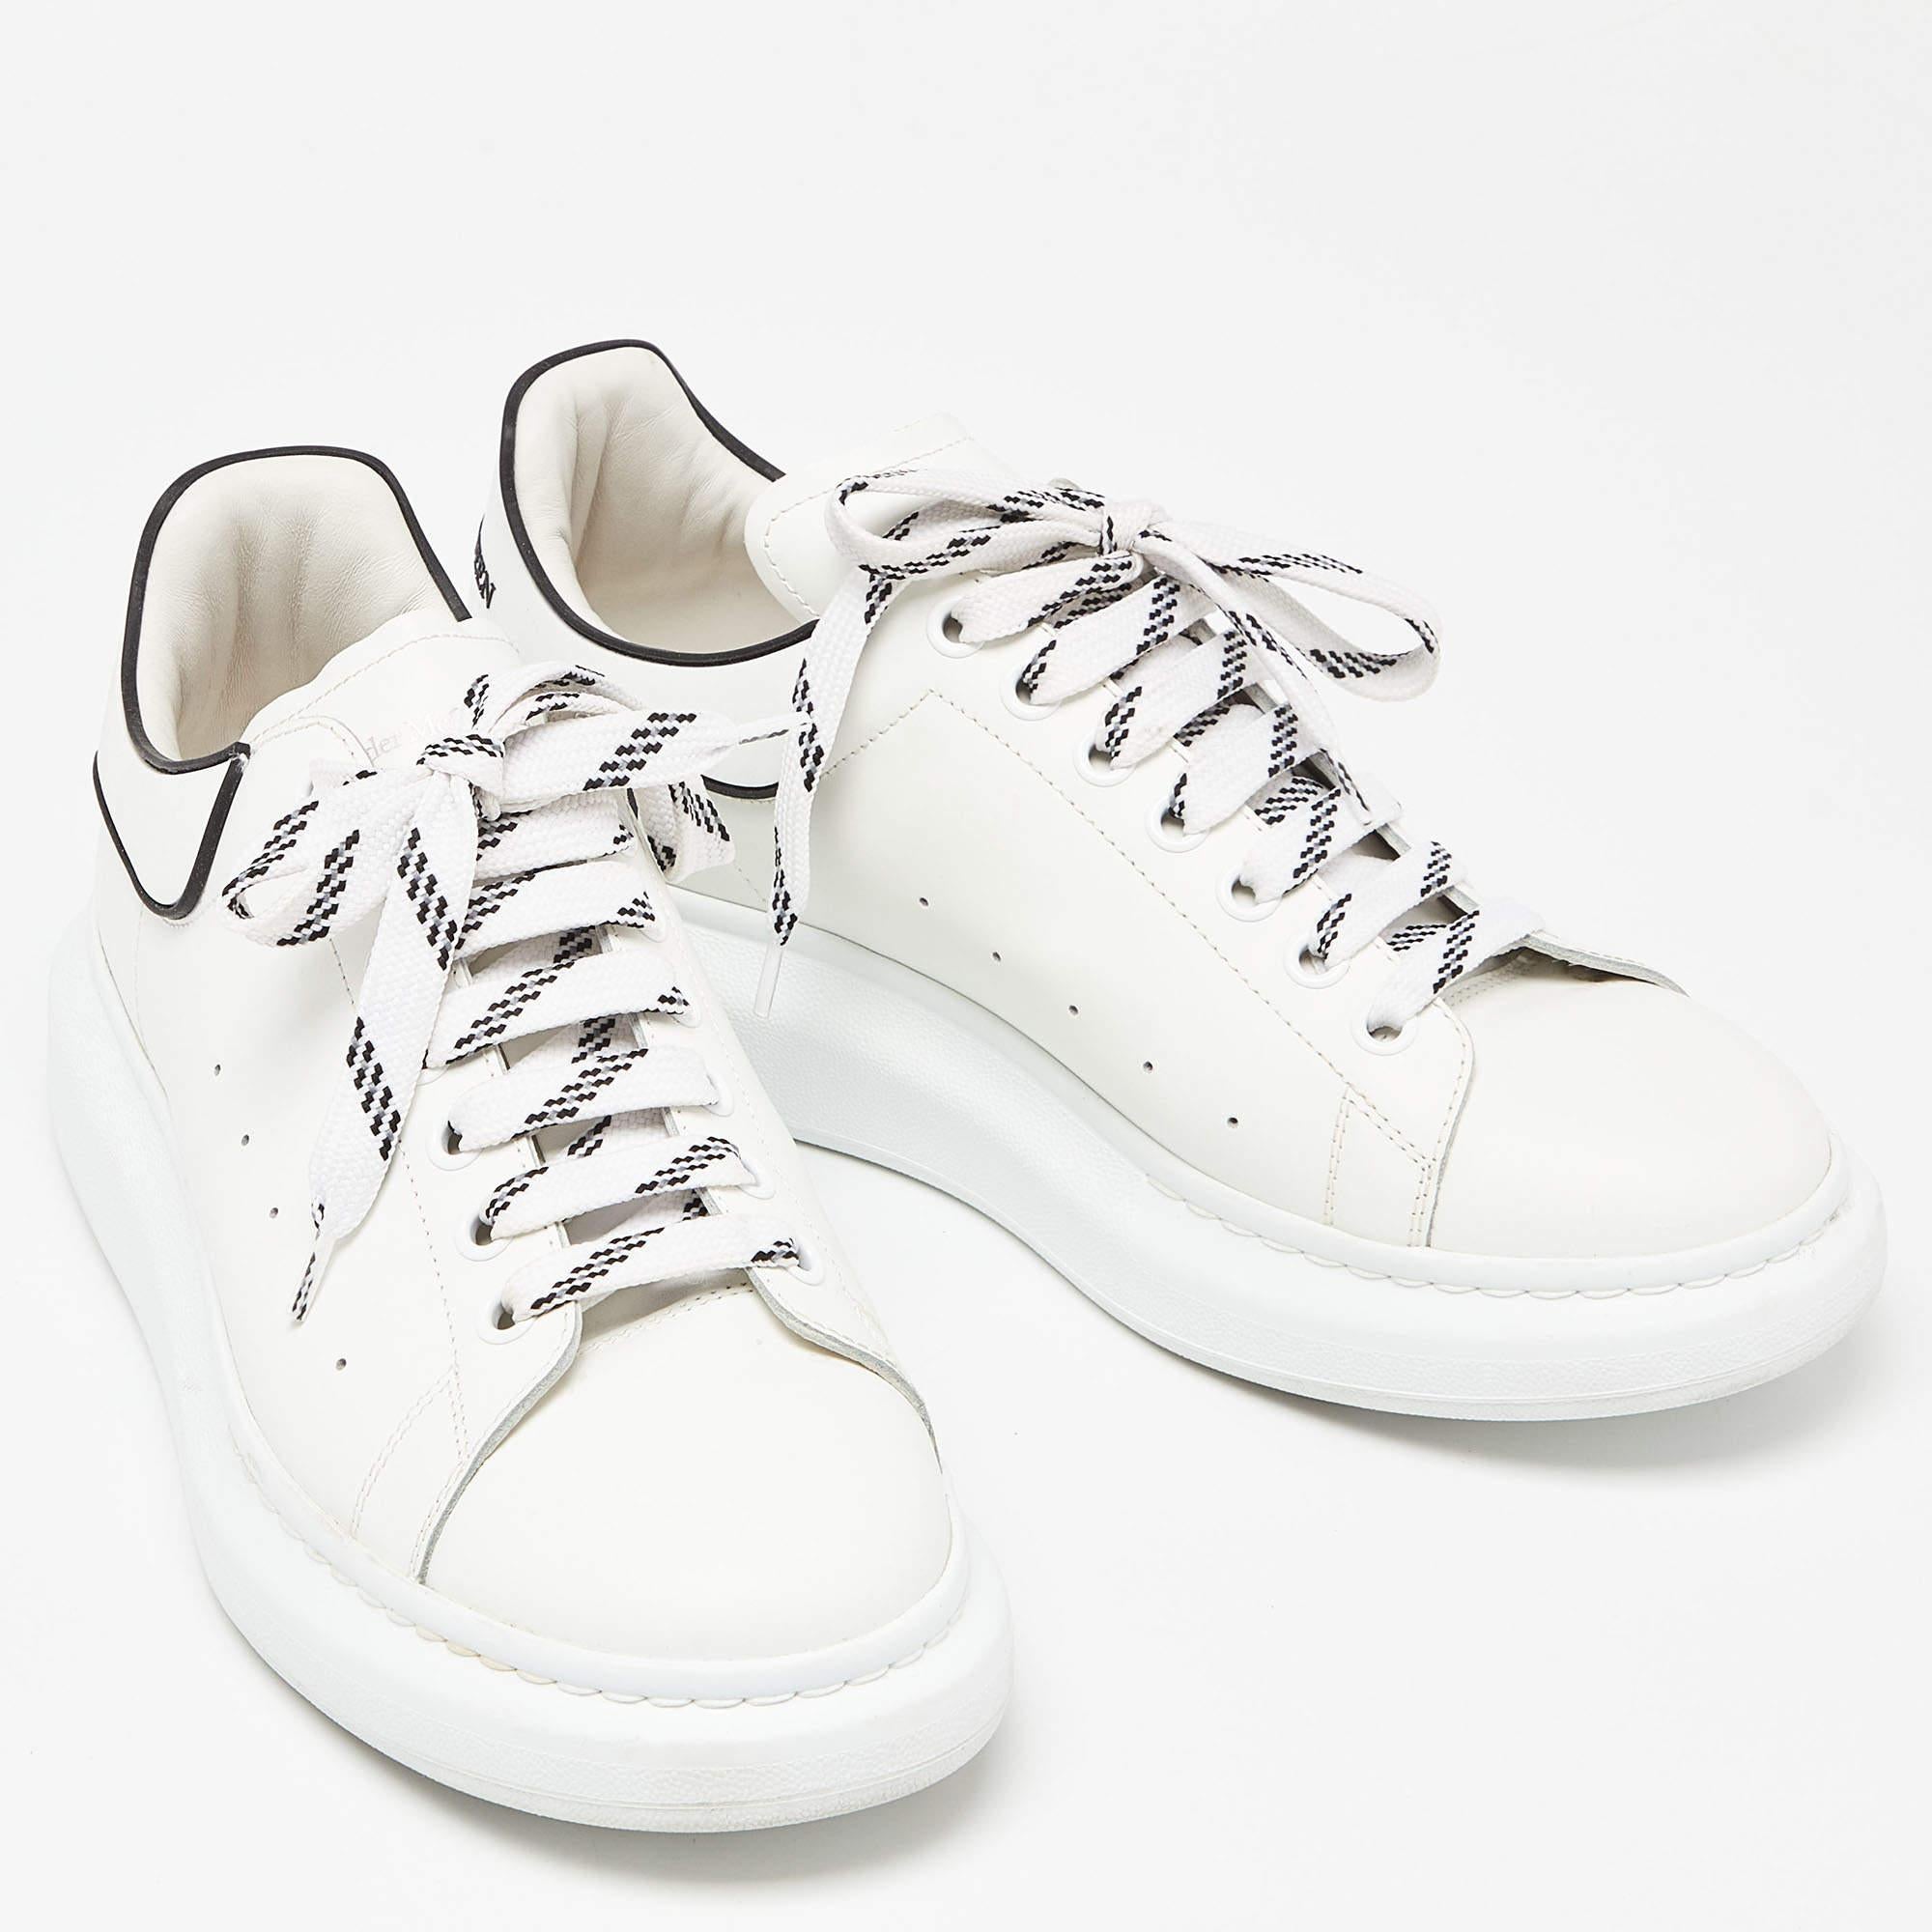 Alexander McQueen White/Black Leather Oversized Sneakers Size 44 1